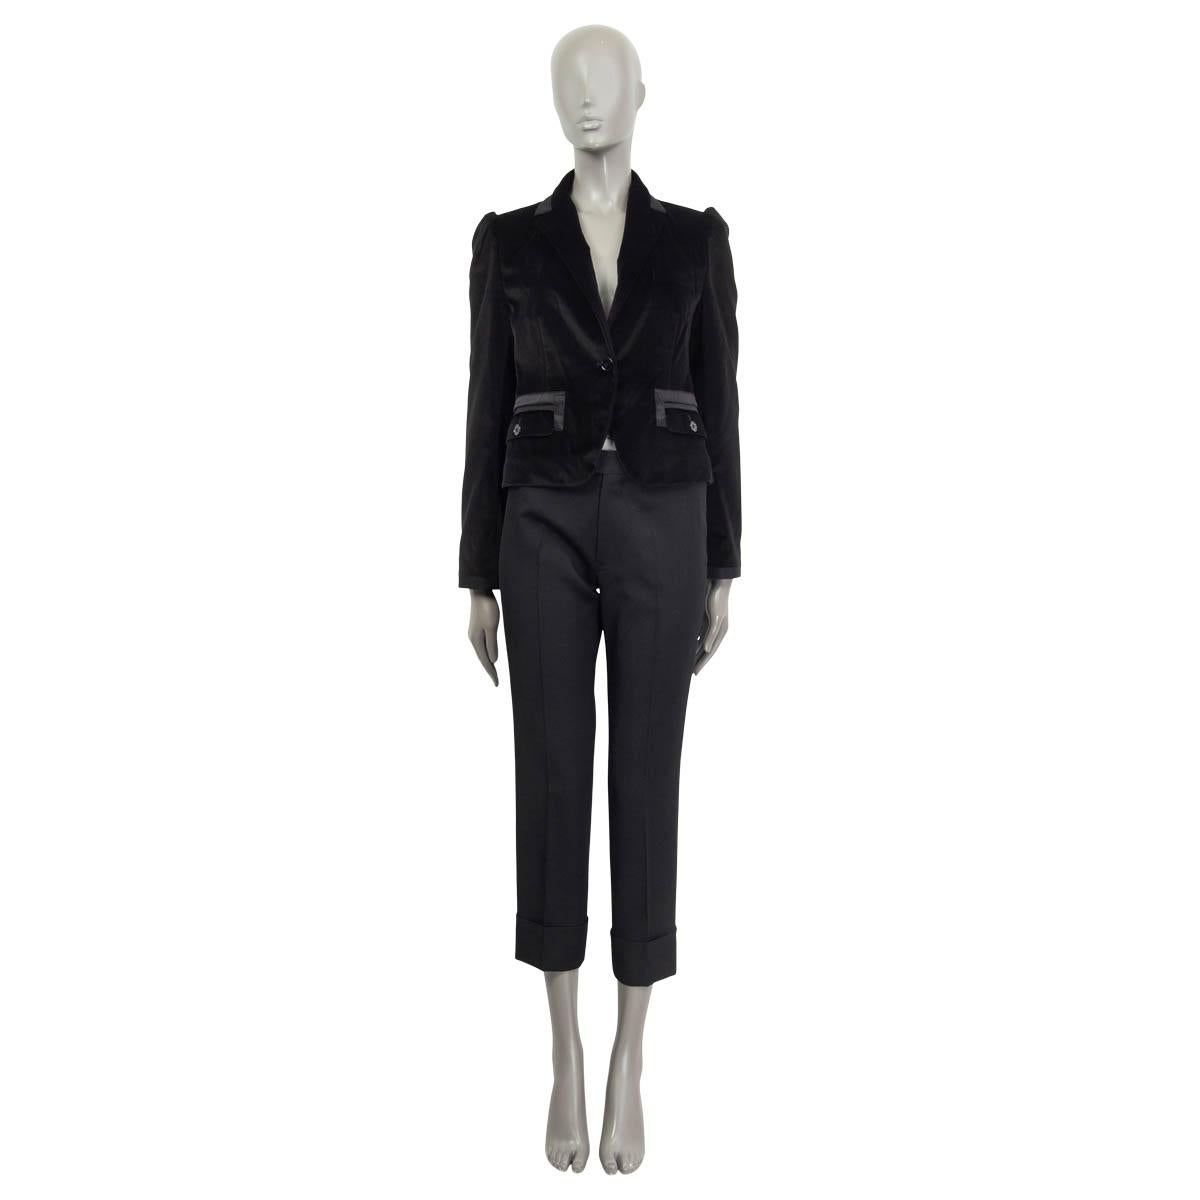 100% authentic Dolce & Gabbana velvet tuxedo jacket in black cotton (87%), silk (8%), polyester (3%) and spandex (2%). Features buttoned cuffs, two buttoned flap pockets on the front and one sewn shut chest pocket. Opens with one button on the